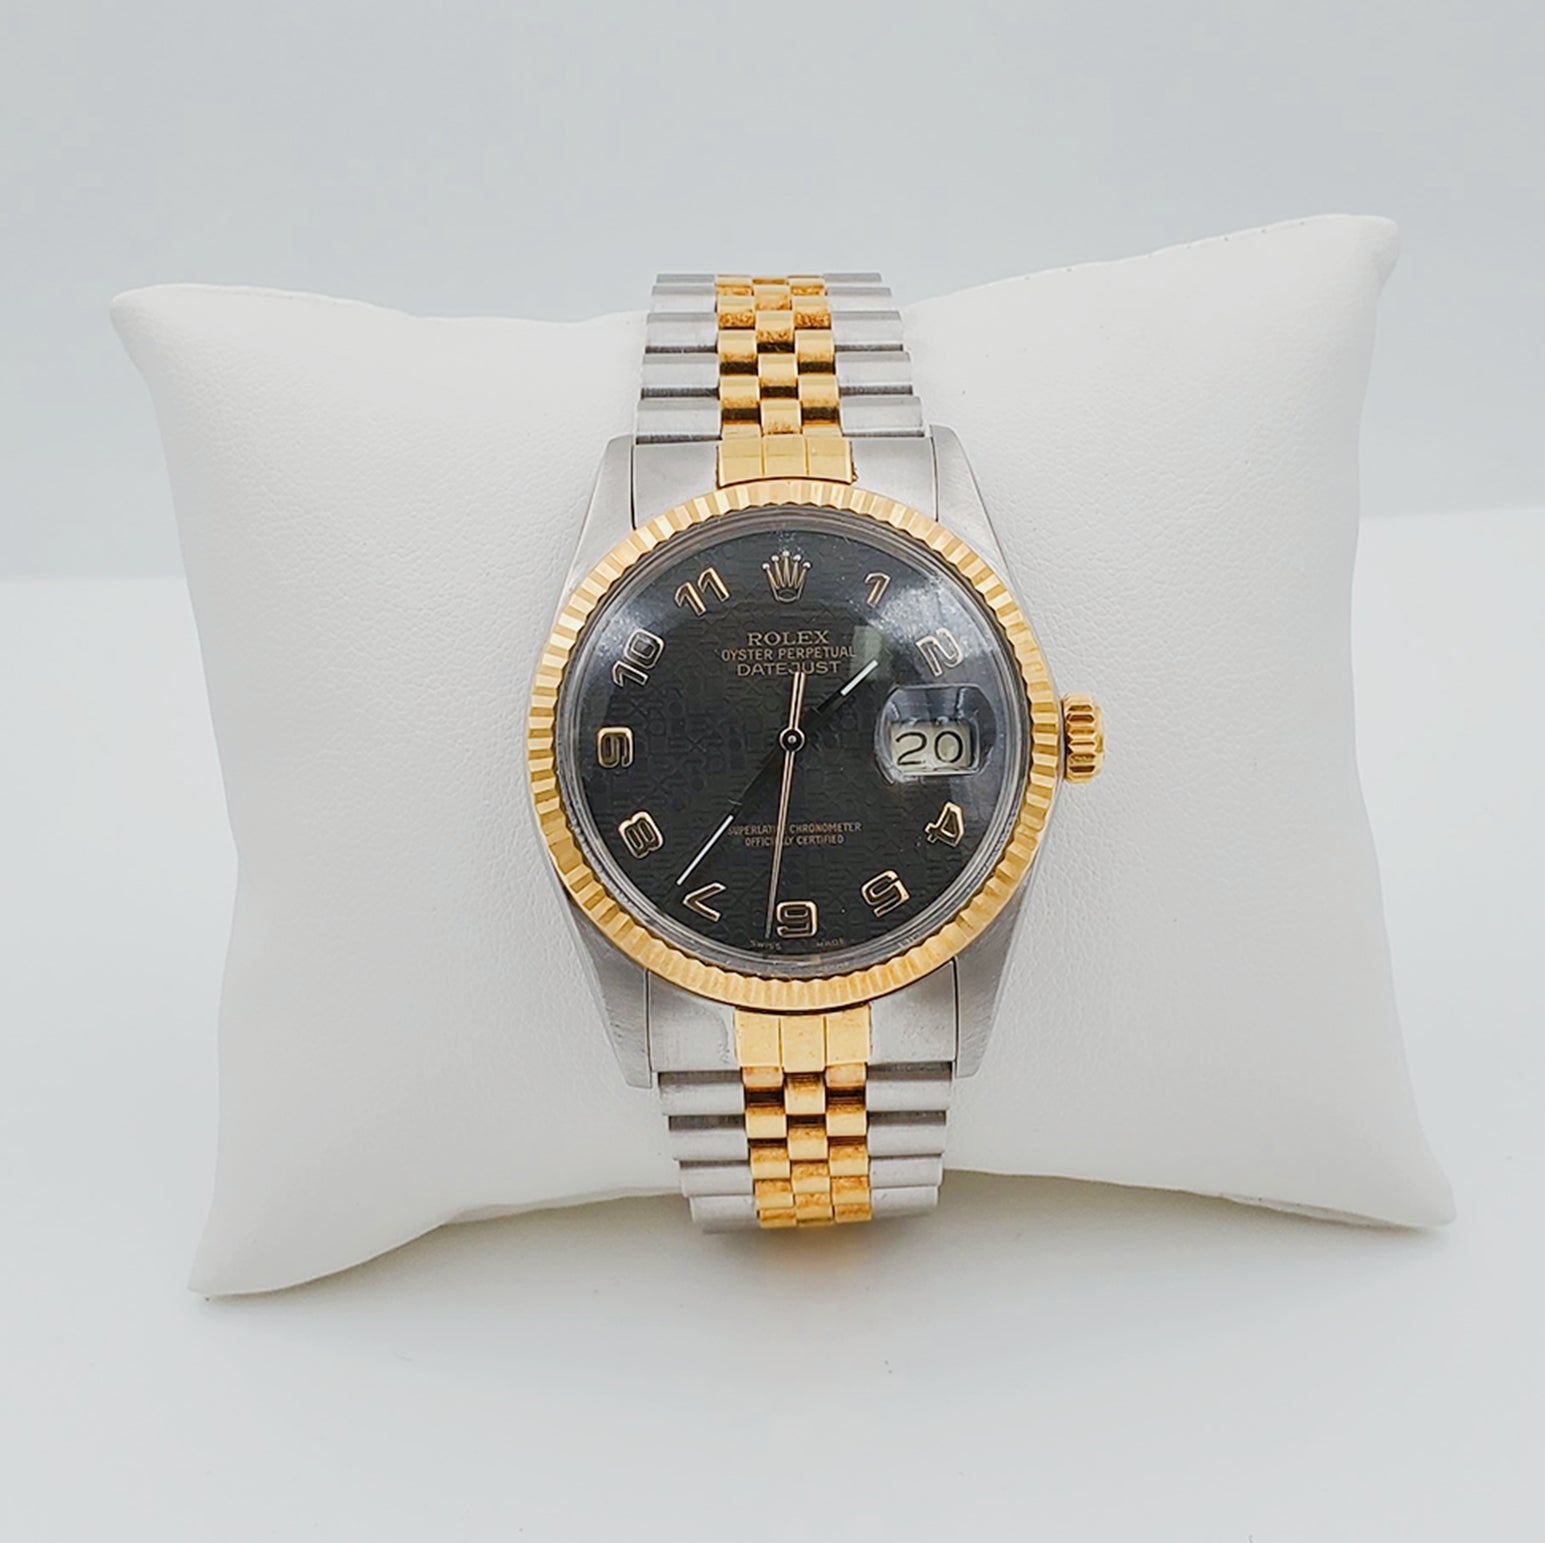 Men's Rolex 36mm DateJust 18k Gold / Stainless Steel Two Tone Watch with Gray/Black Dial and Fluted Bezel. (Pre-Owned)